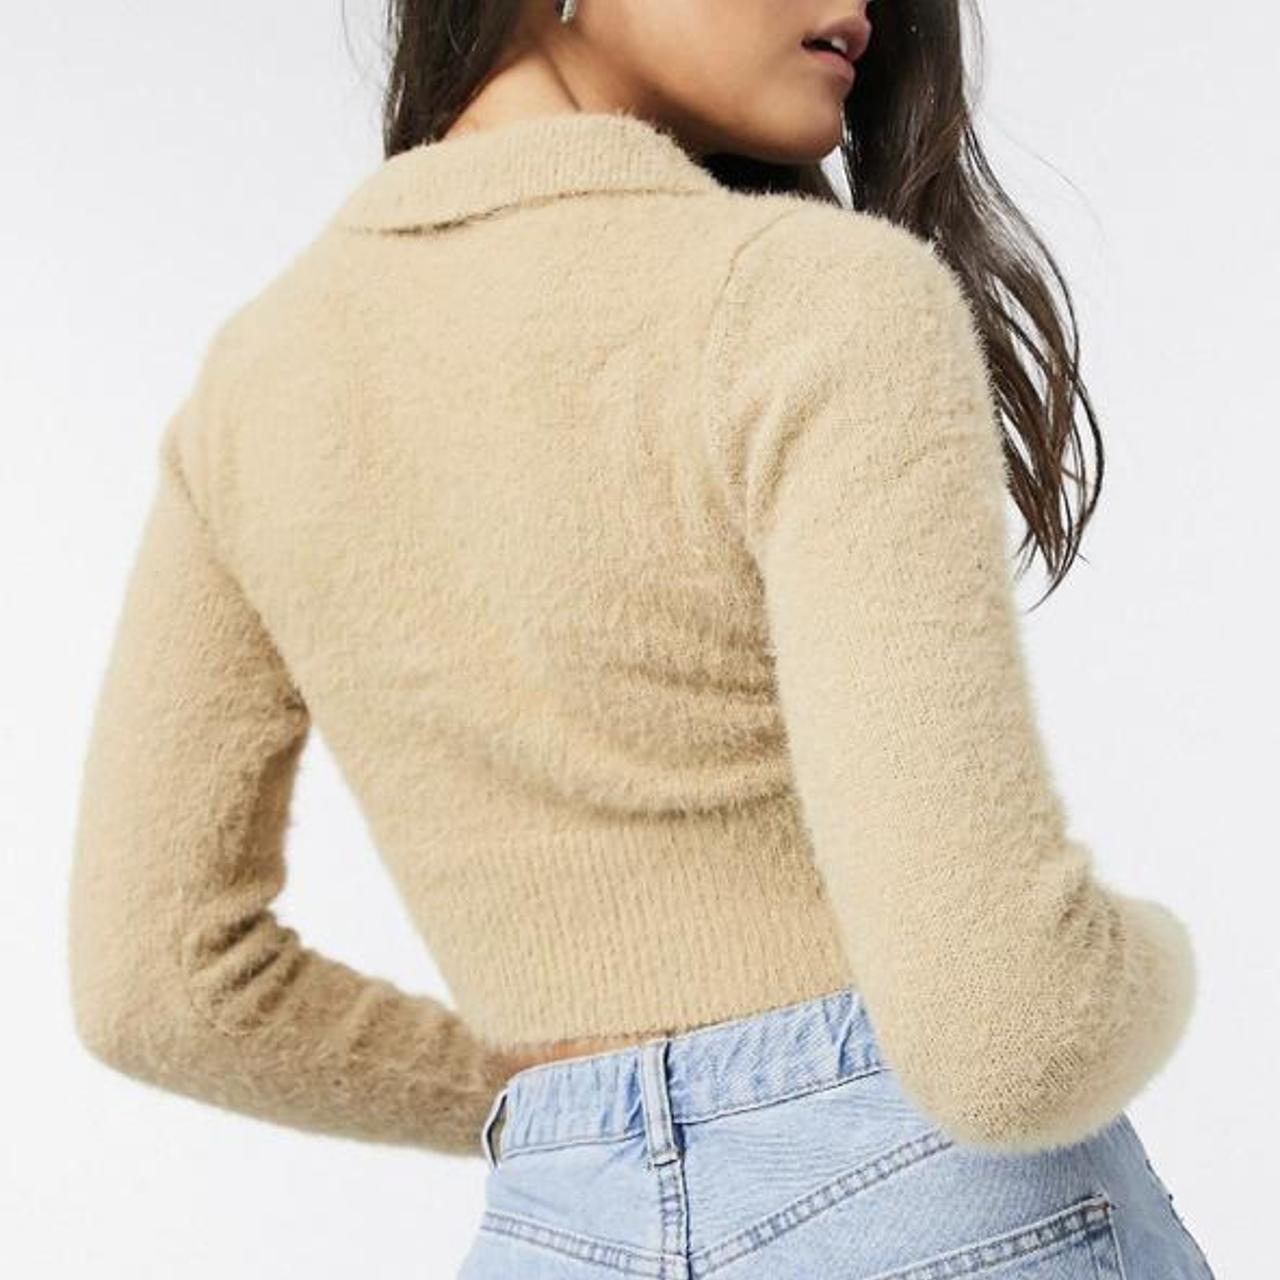 Urban Outfitters Women's Jumper (3)